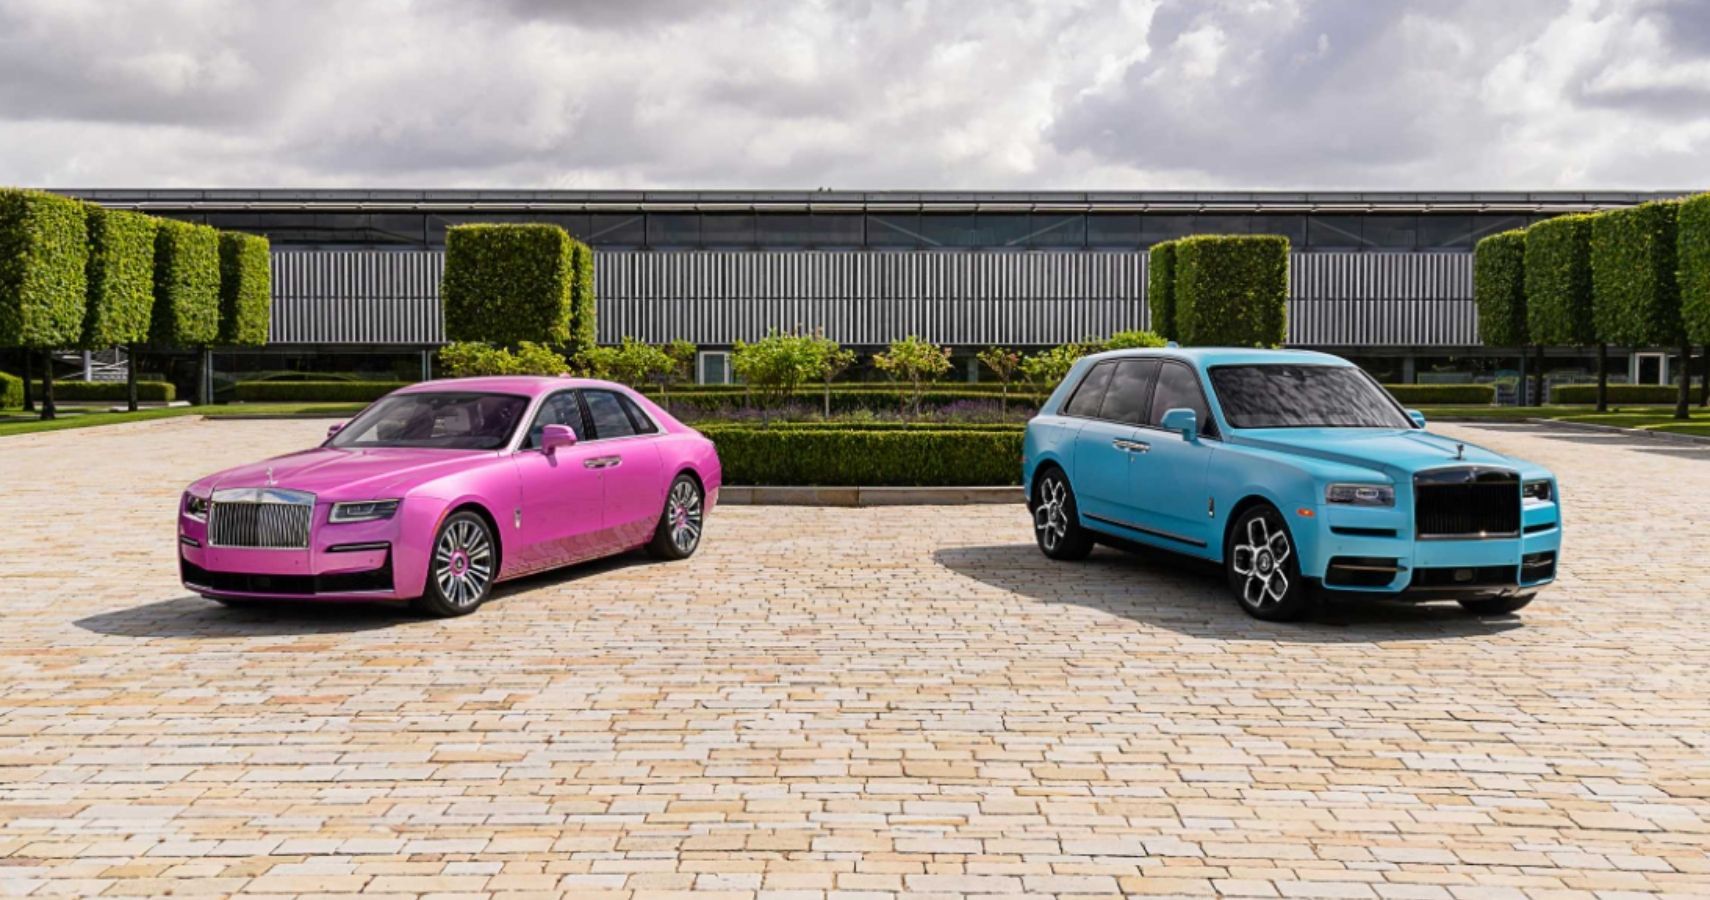 Rolls-Royce Ghost Sedan And Cullinan SUV In Pink And Blue Colors